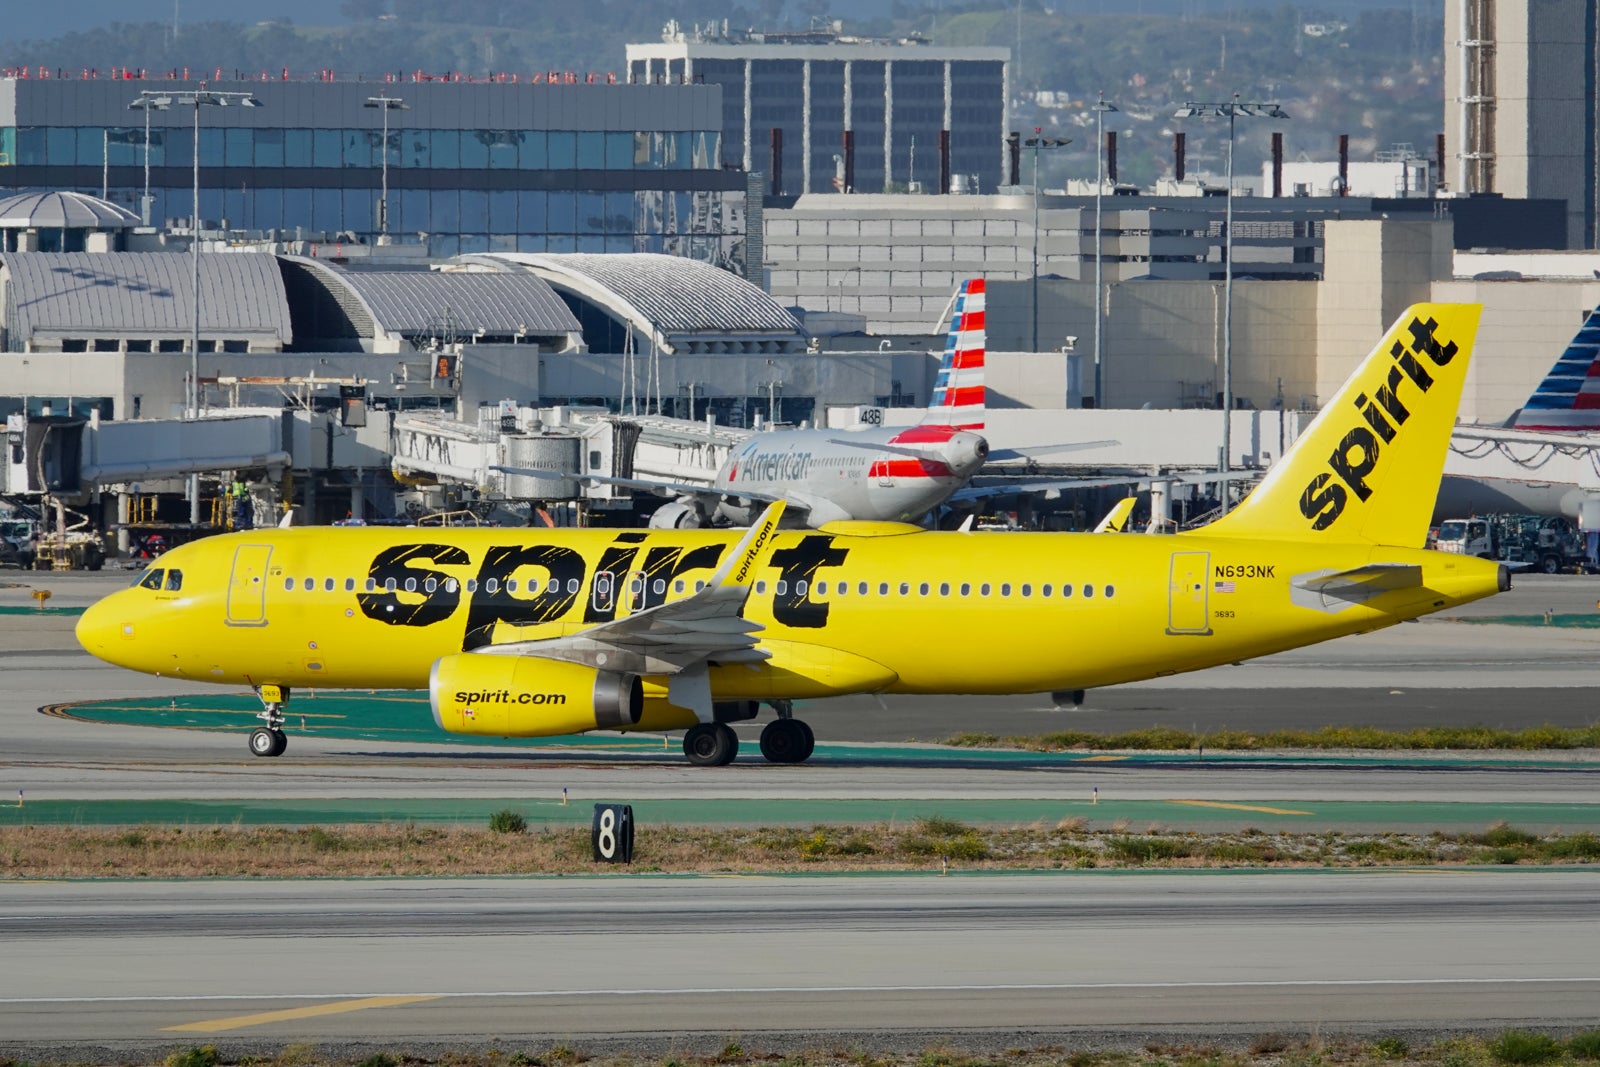 Spirit unveils upgraded onboard experience, including new Big Front Seats